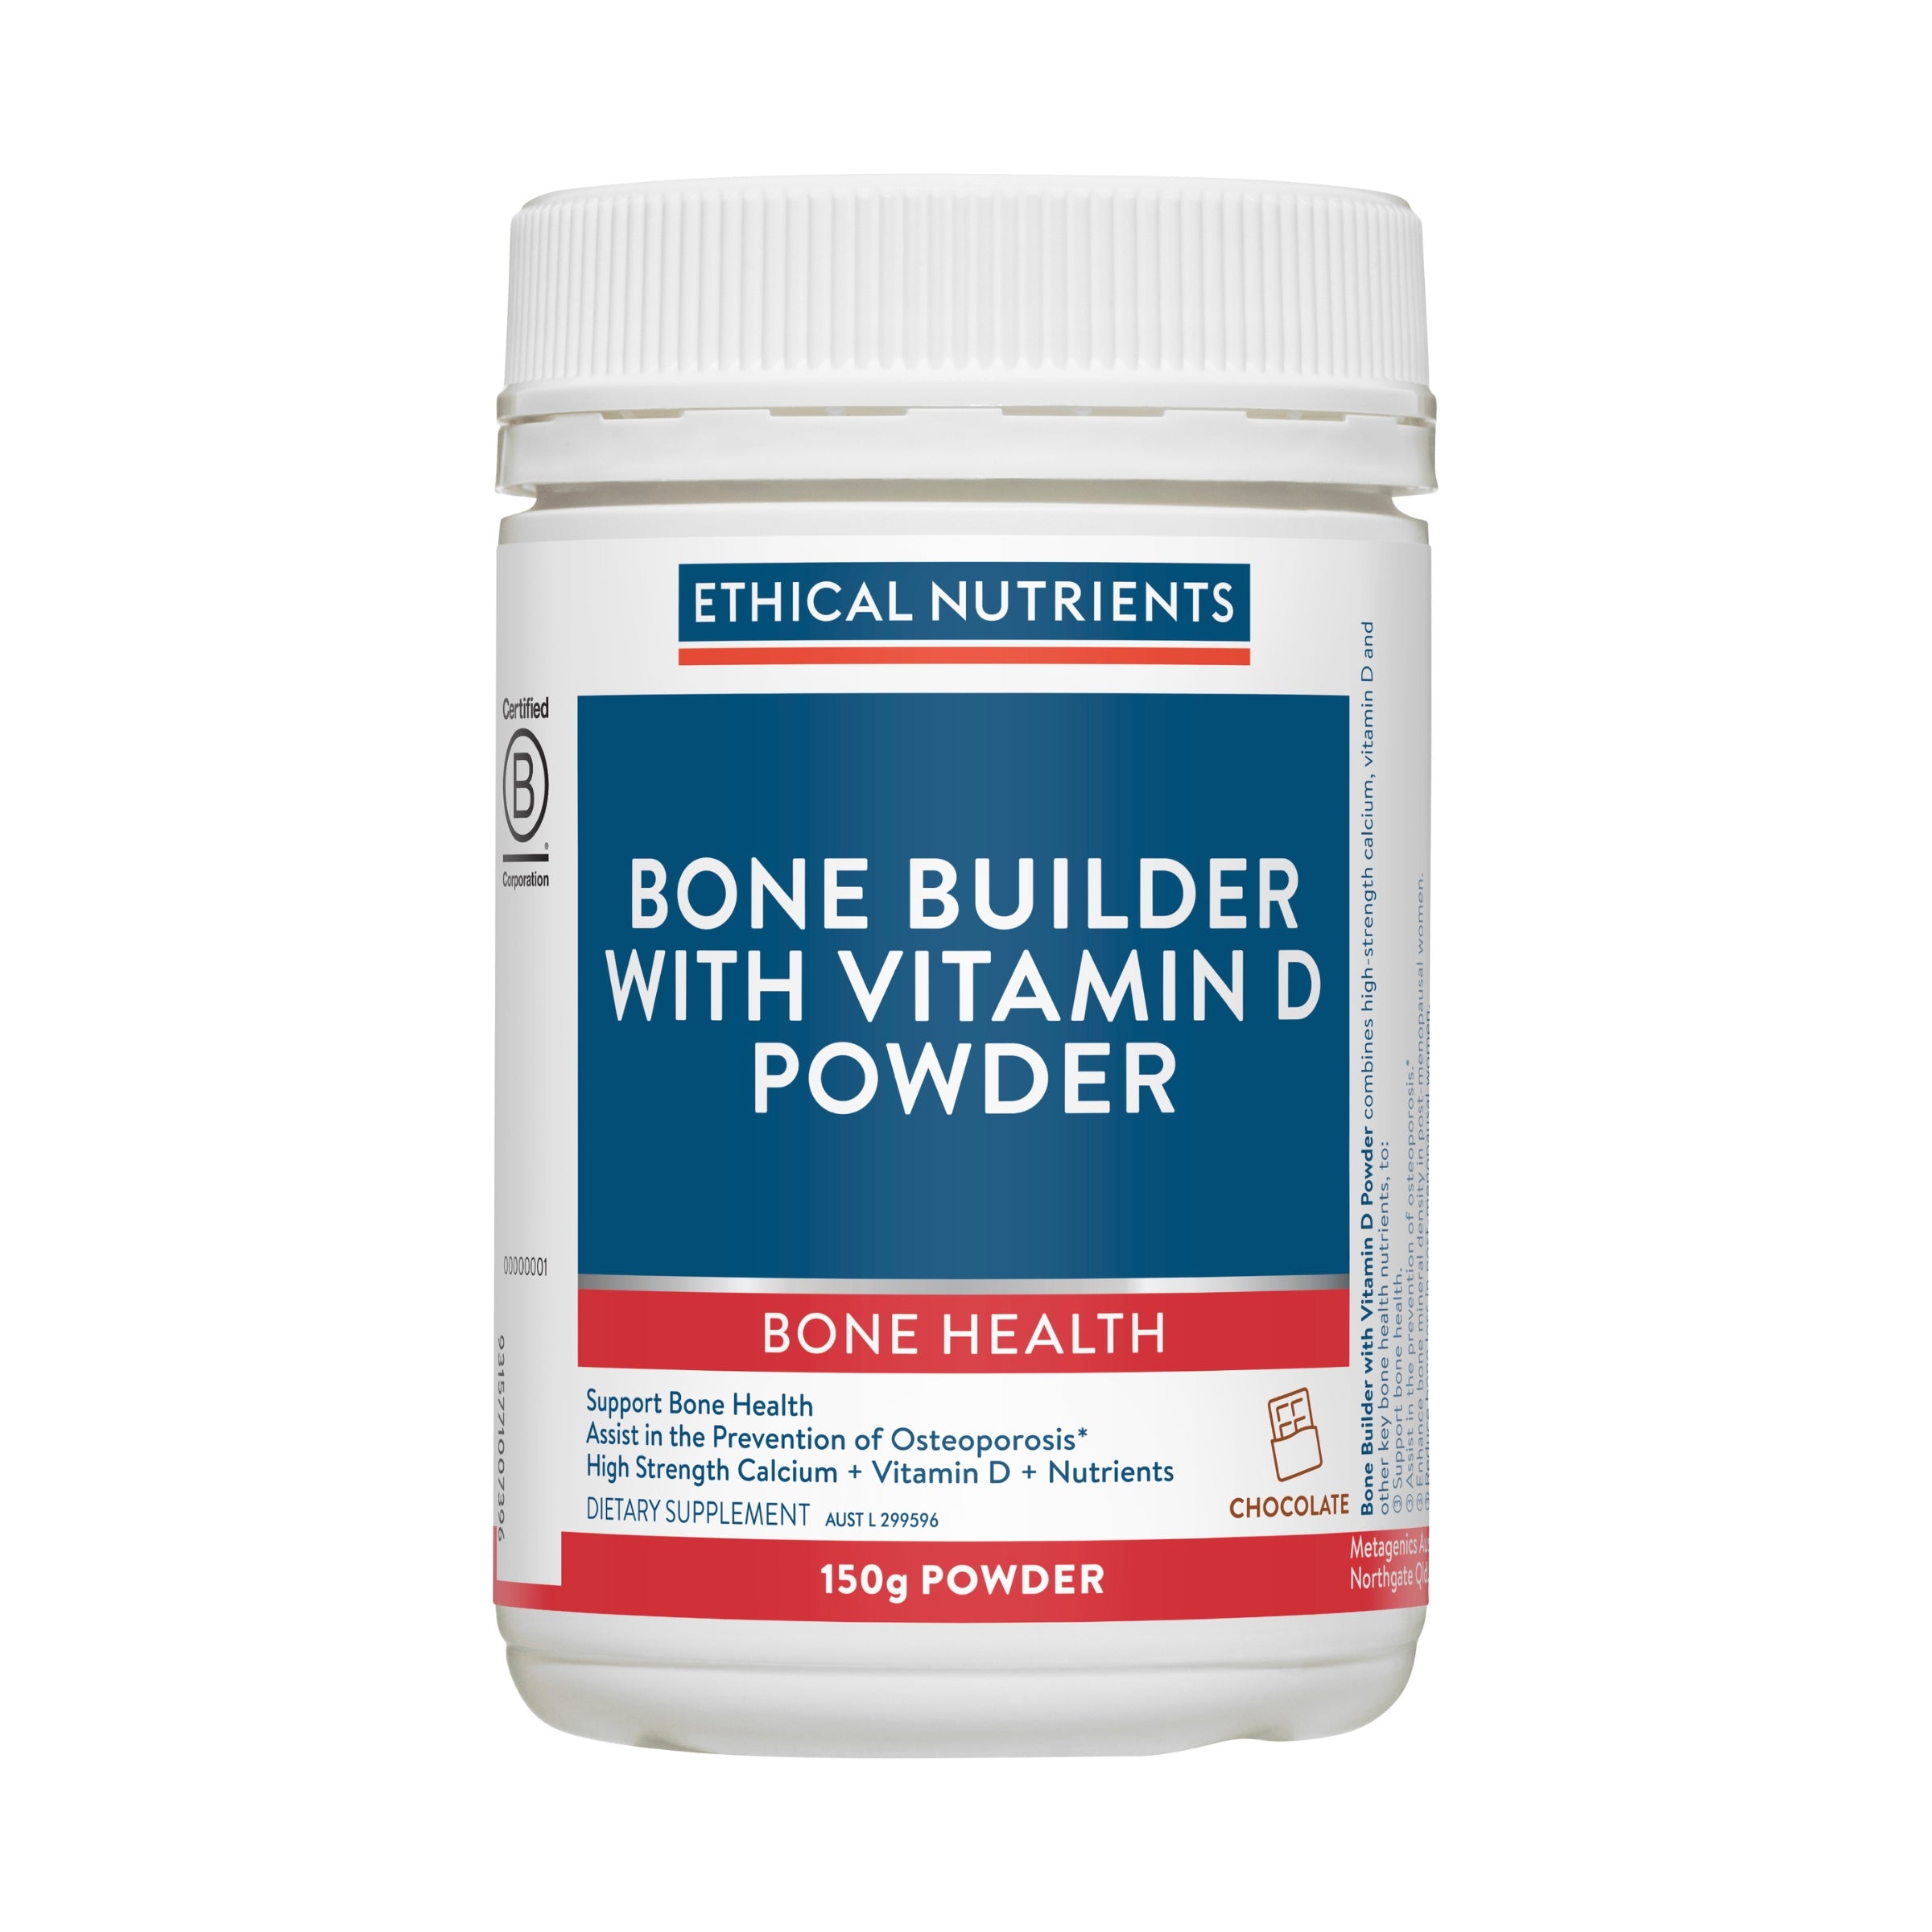 Ethical Nutrients Bone Builder with Vitamin D Powder Chocolate 150g #size_150g